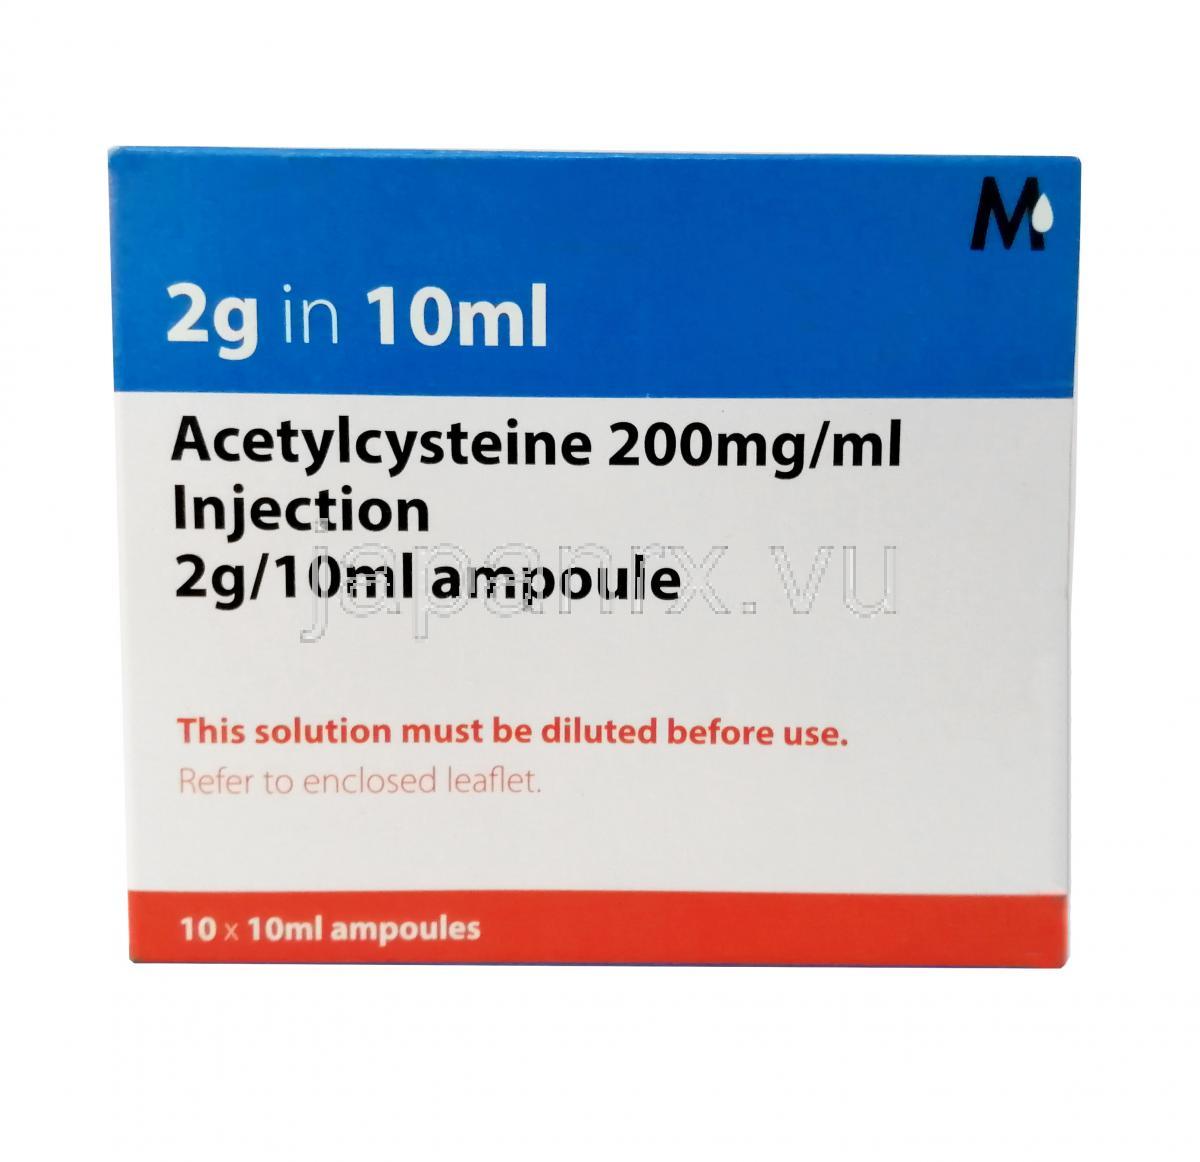 Acetylcysteine Solution for Injection, Acetylcysteine 200mg/mL,Ampule 10mL, Mucomyst, Box front view